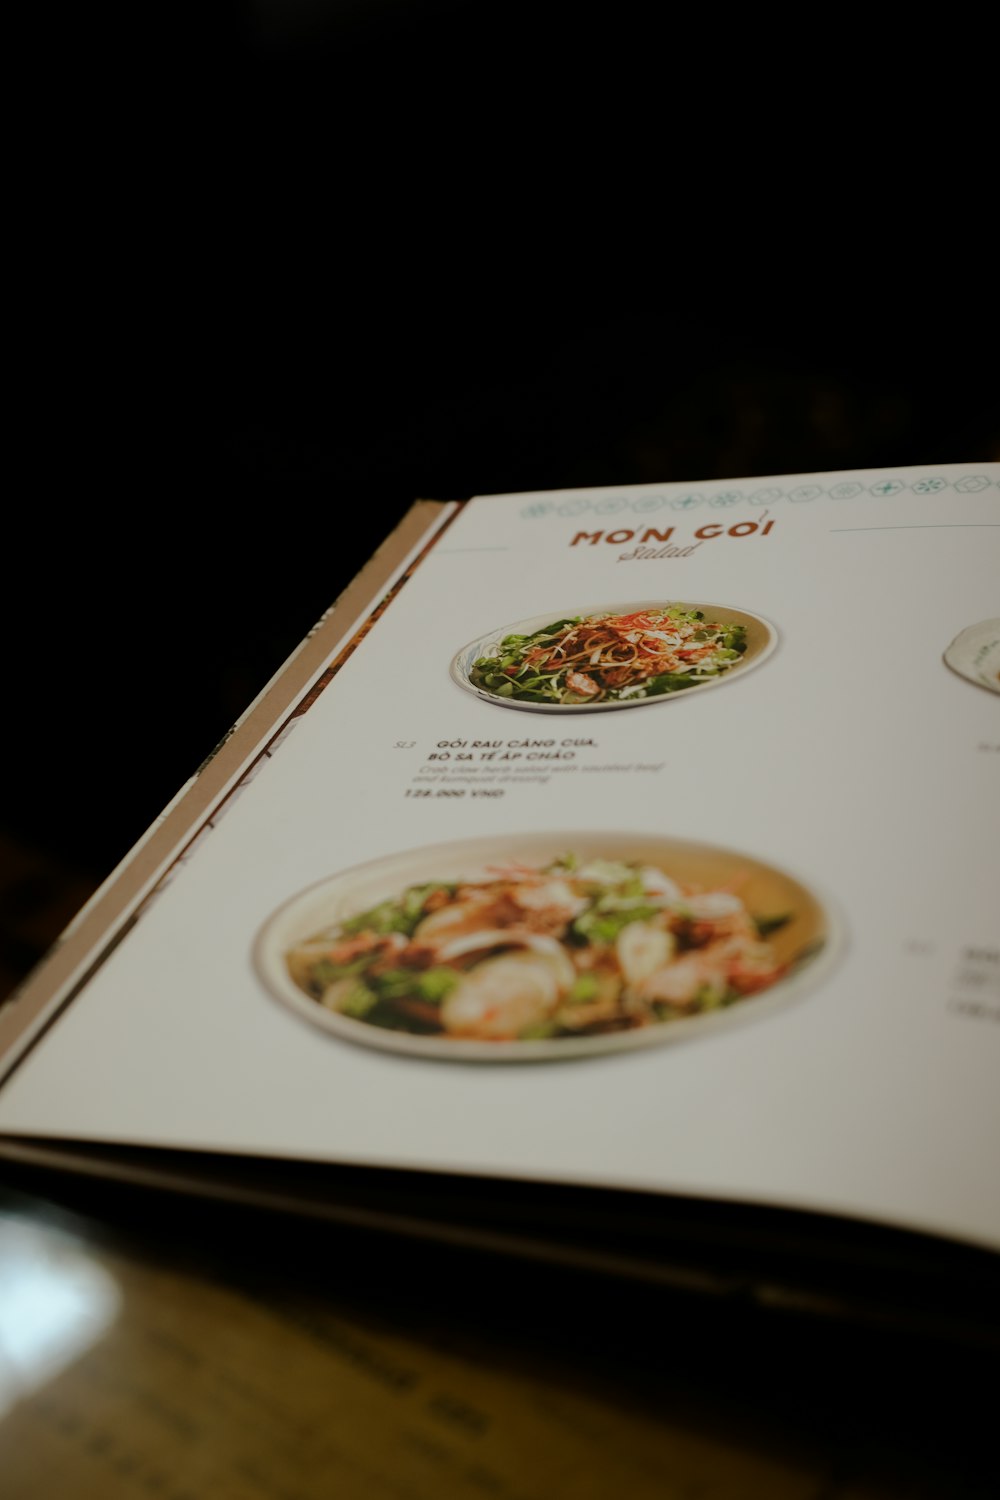 a menu is open on a wooden table